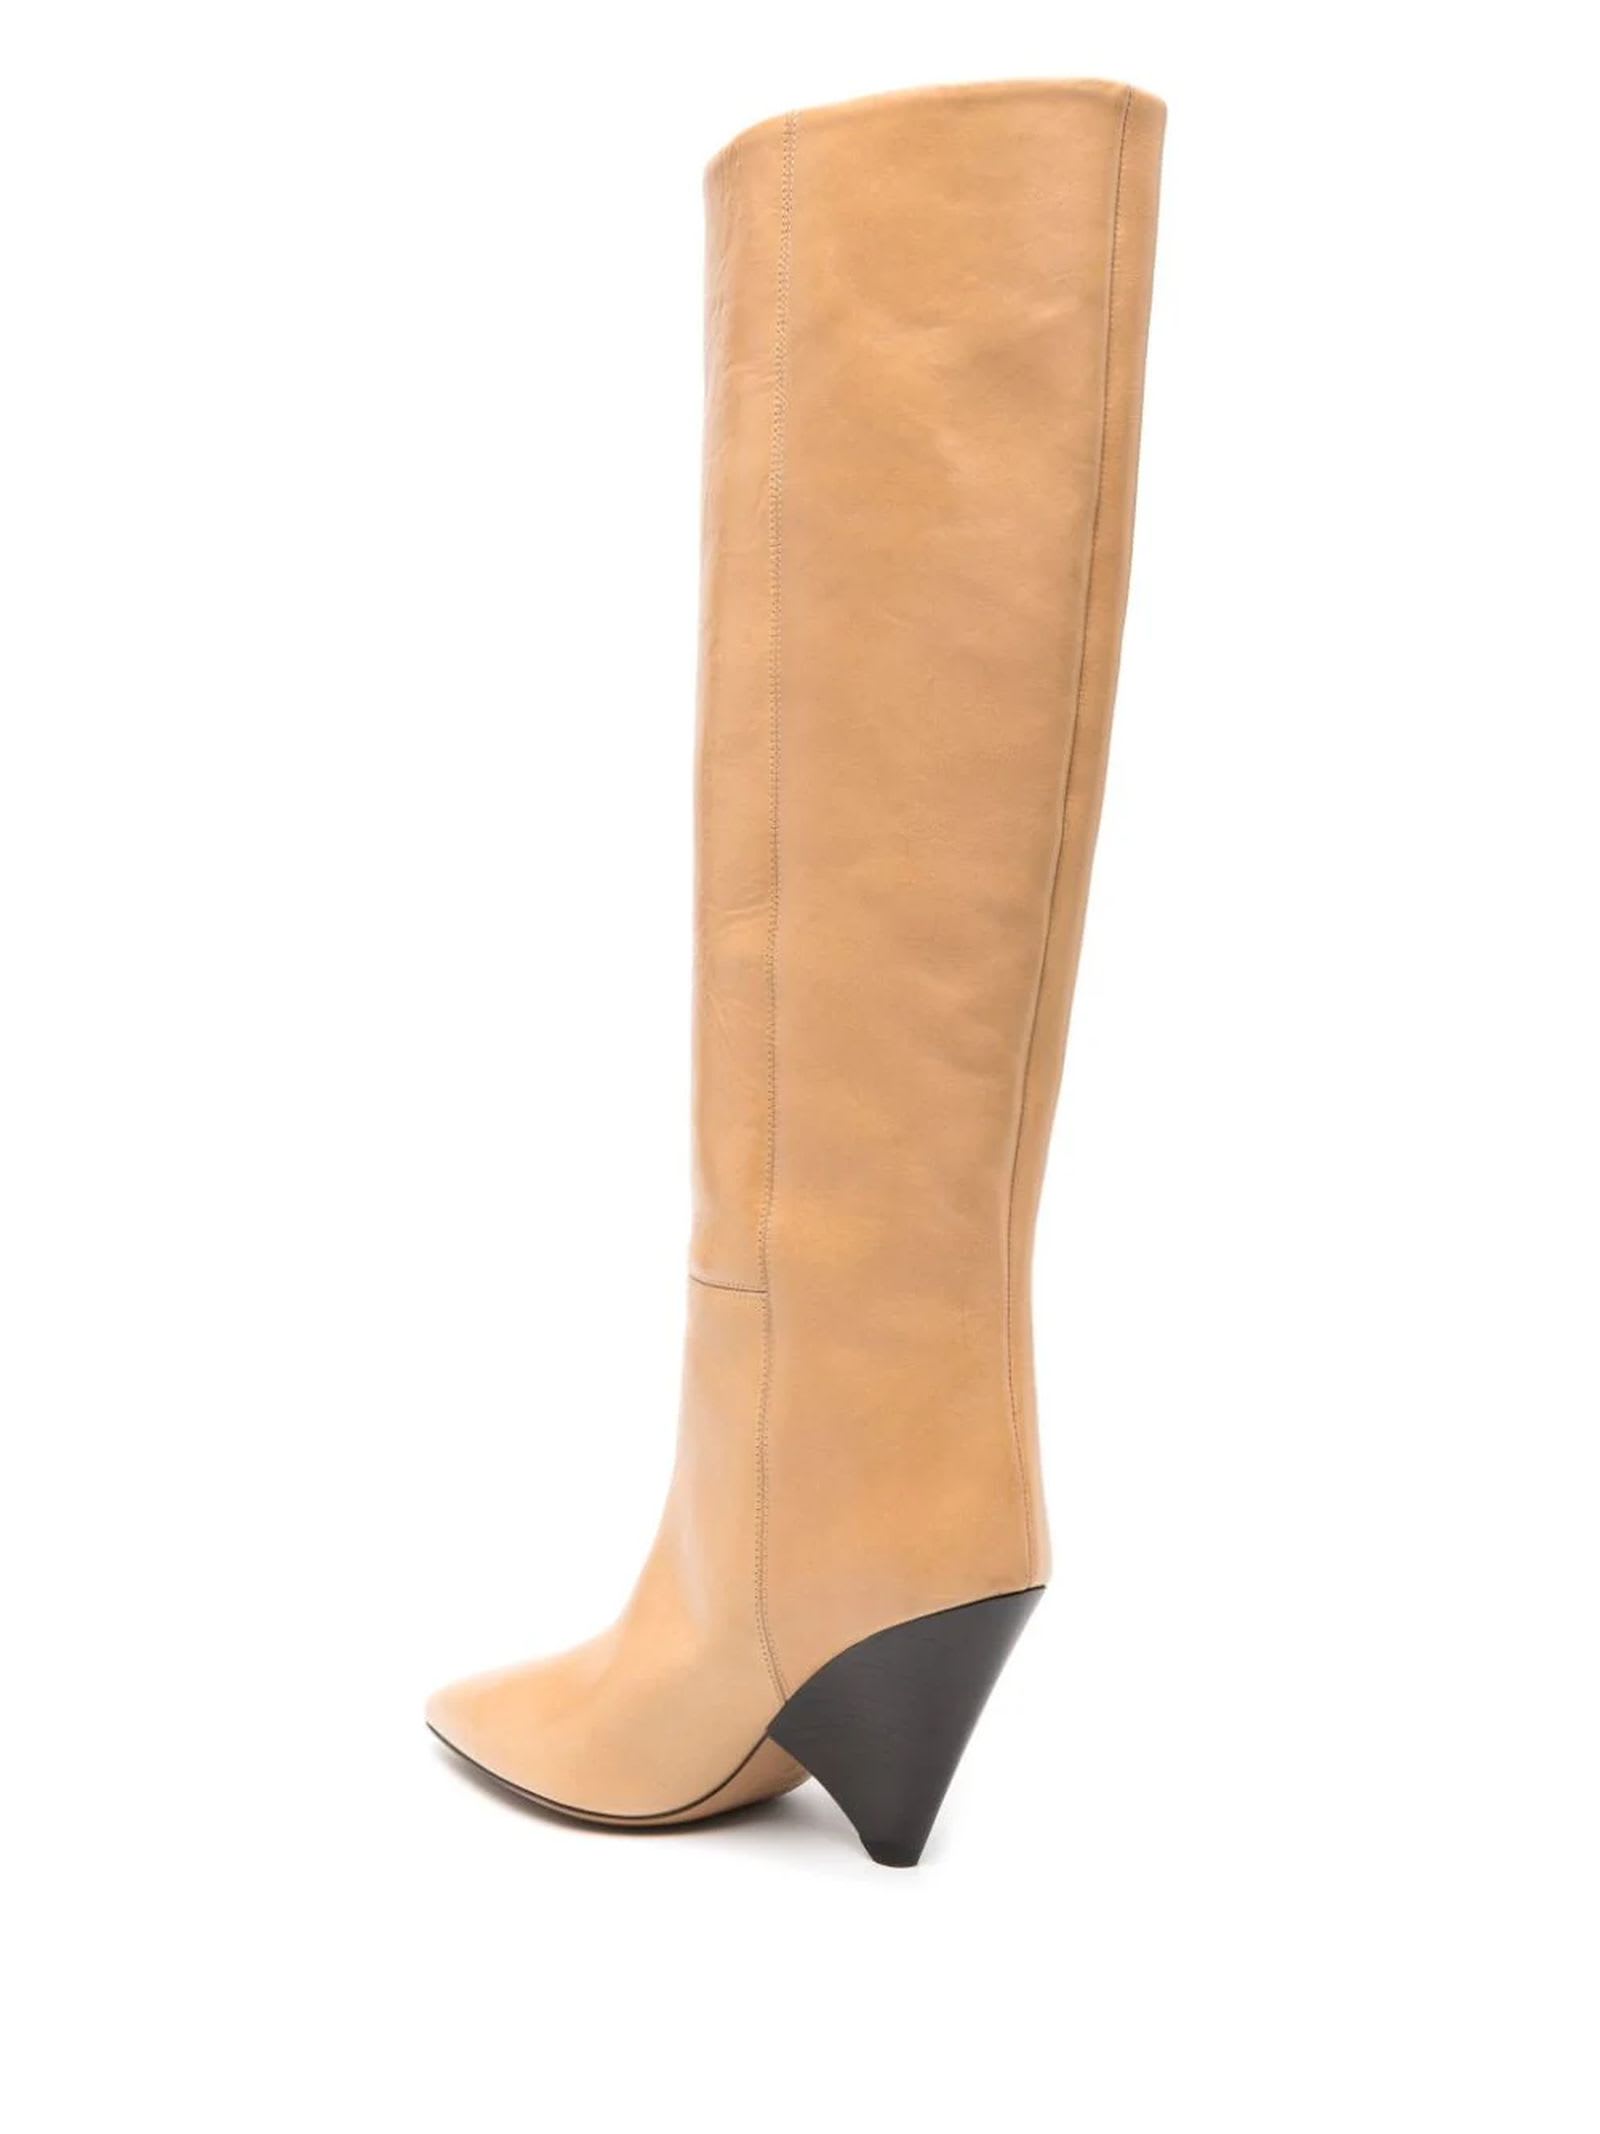 ISABEL MARANT CAMEL BROWN CALF LEATHER BOOTS